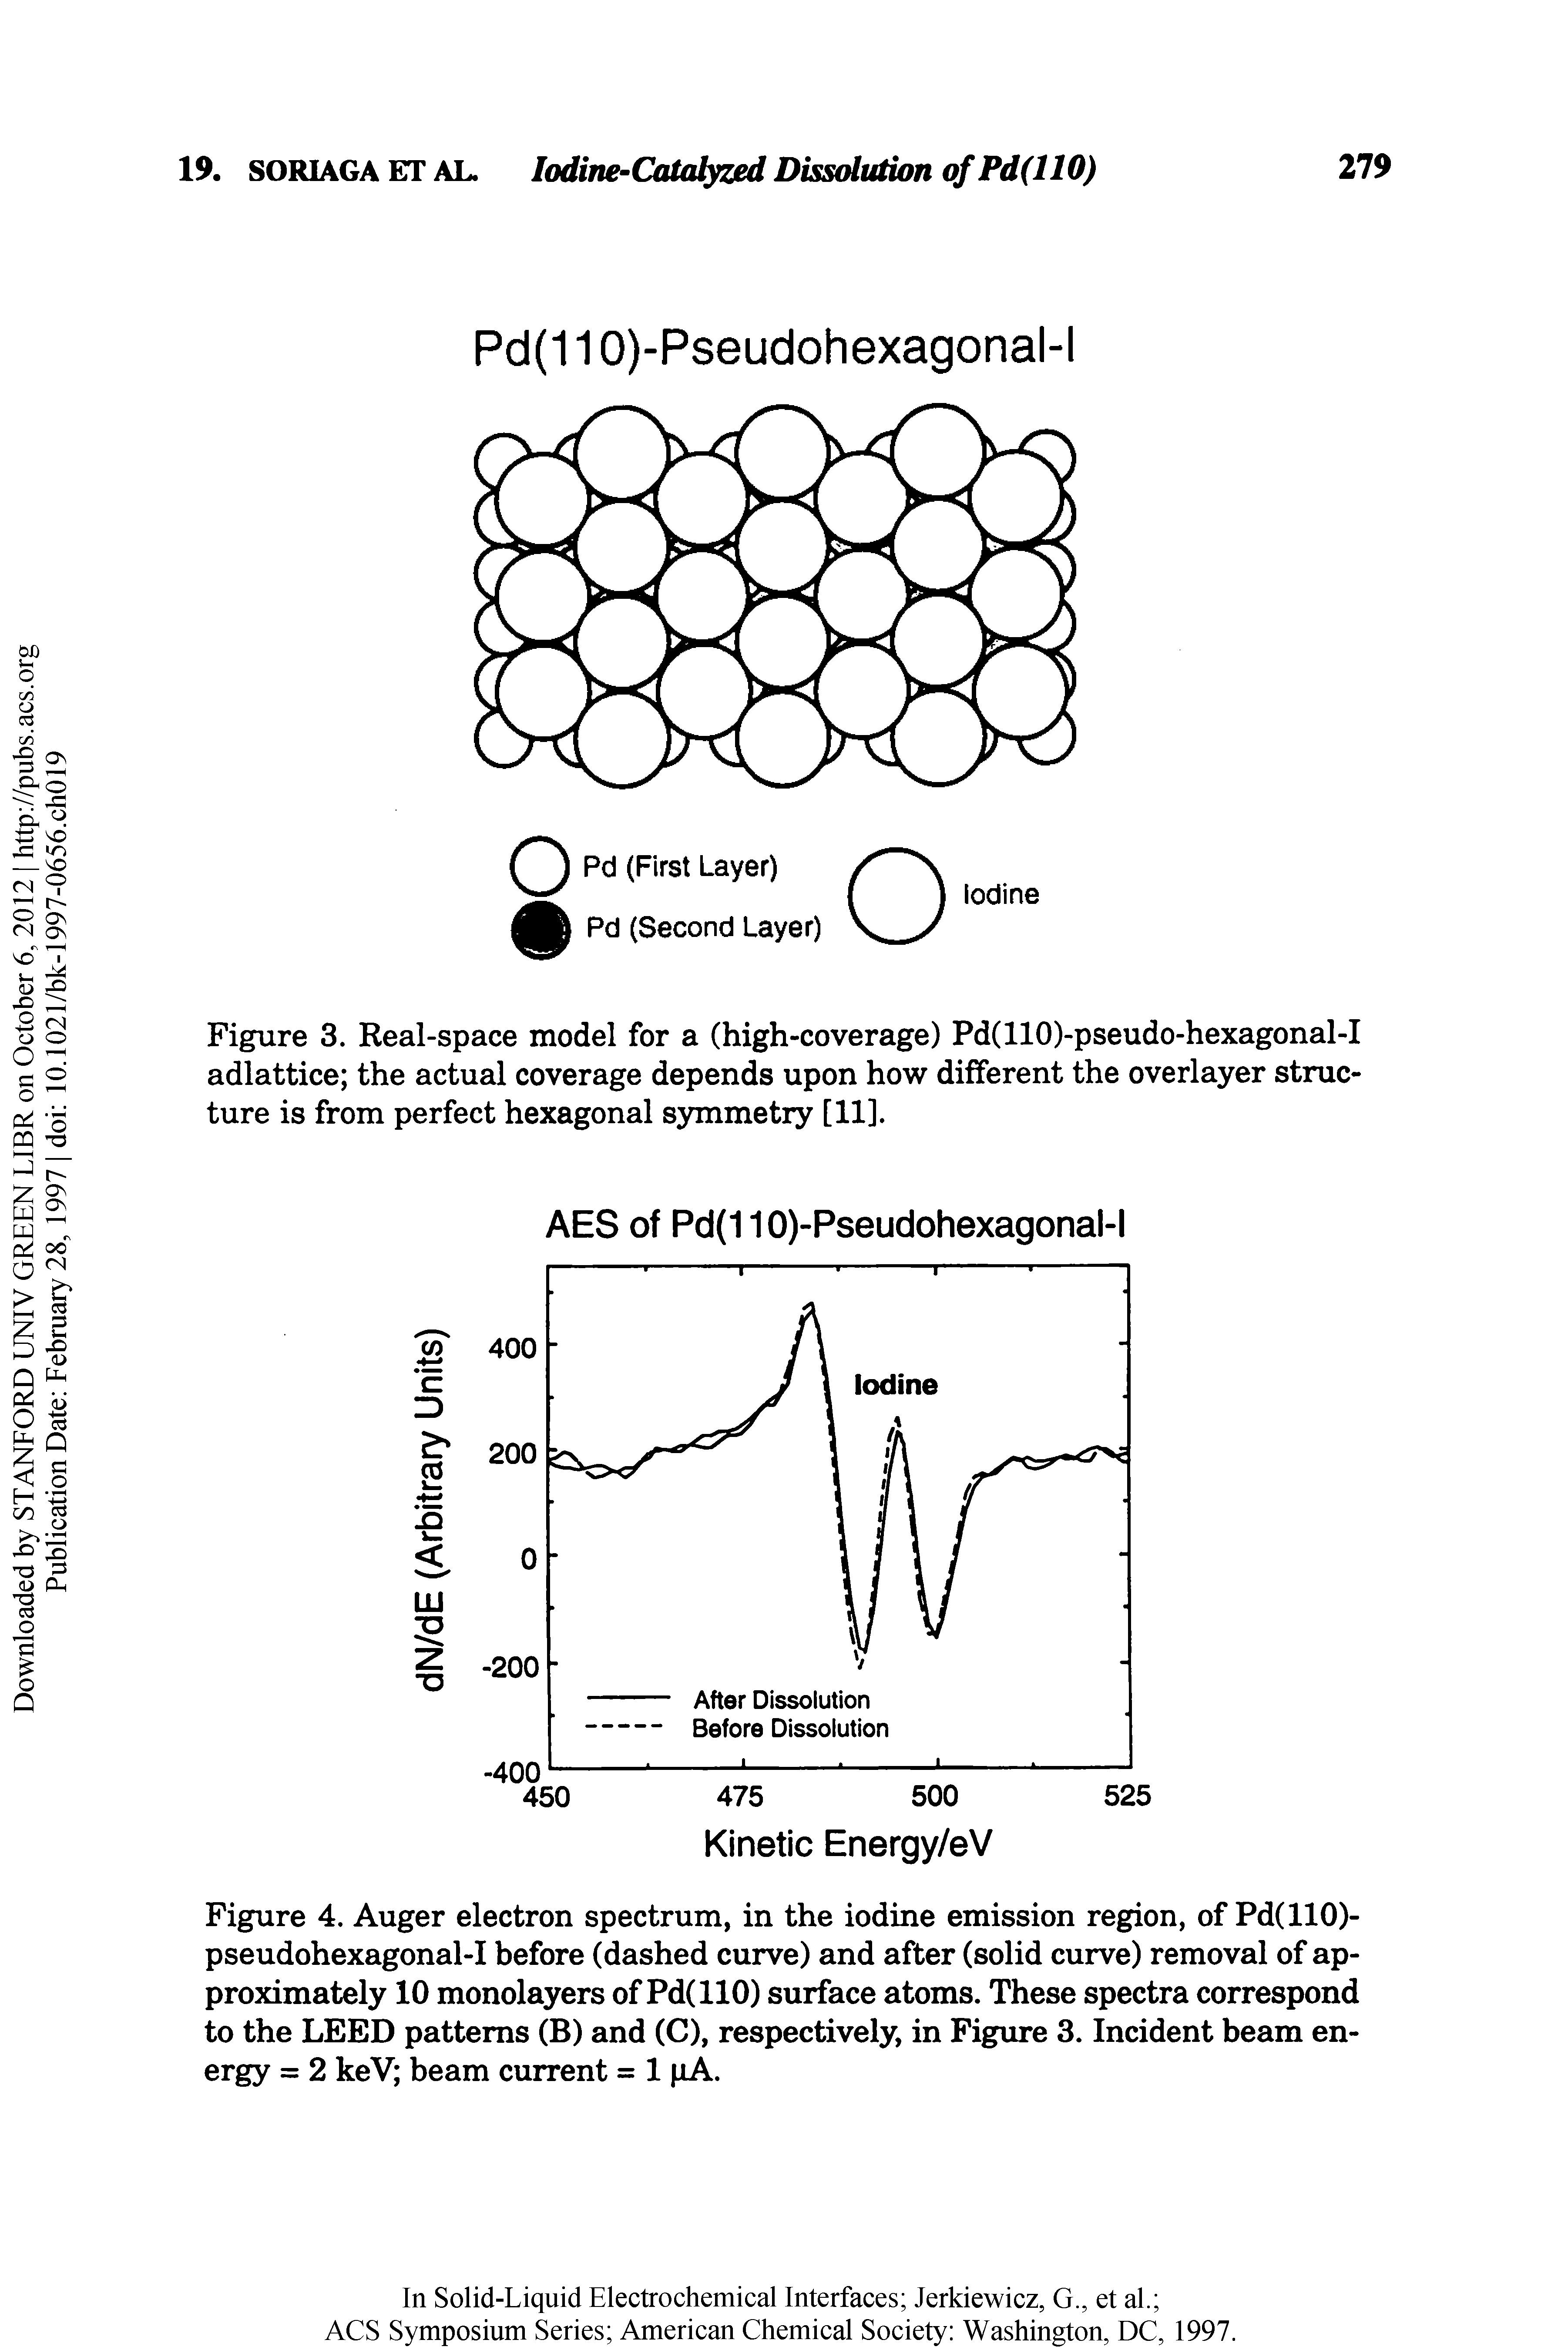 Figure 4. Auger electron spectrum, in the iodine emission region, of Pd(llO)-pseudohexagonal-I before (dashed curve) and after (solid curve) removal of approximately 10 monolayers of Pd(llO) surface atoms. These spectra correspond to the LEED patterns (B) and (C), respectively, in Figure 3. Incident beam energy = 2 keV beam current = 1 pA.